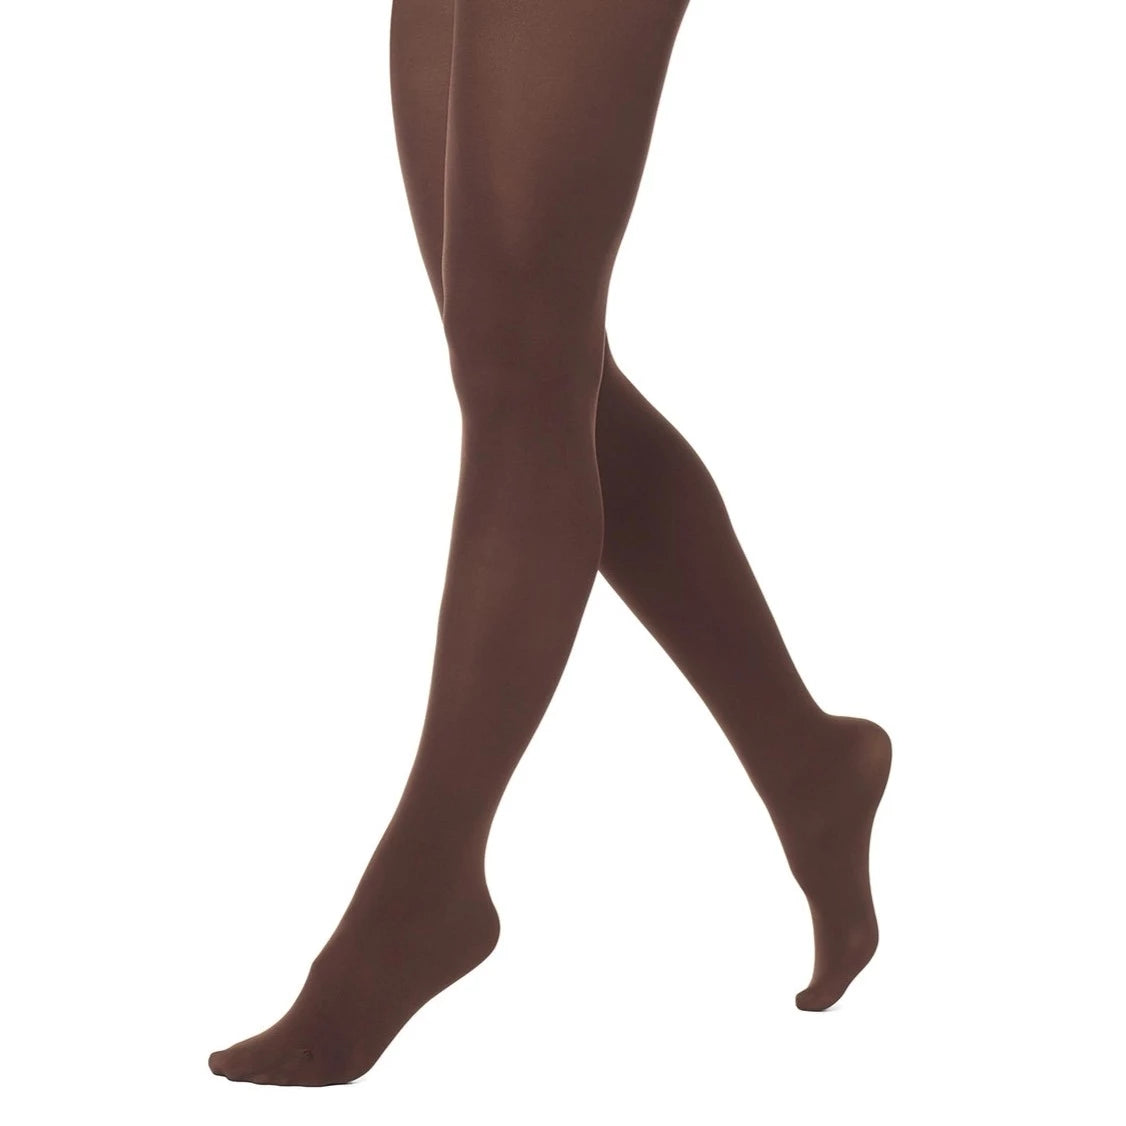 Hue Women's Super Opaque Tights with Control Top, Black, 1 at   Women's Clothing store